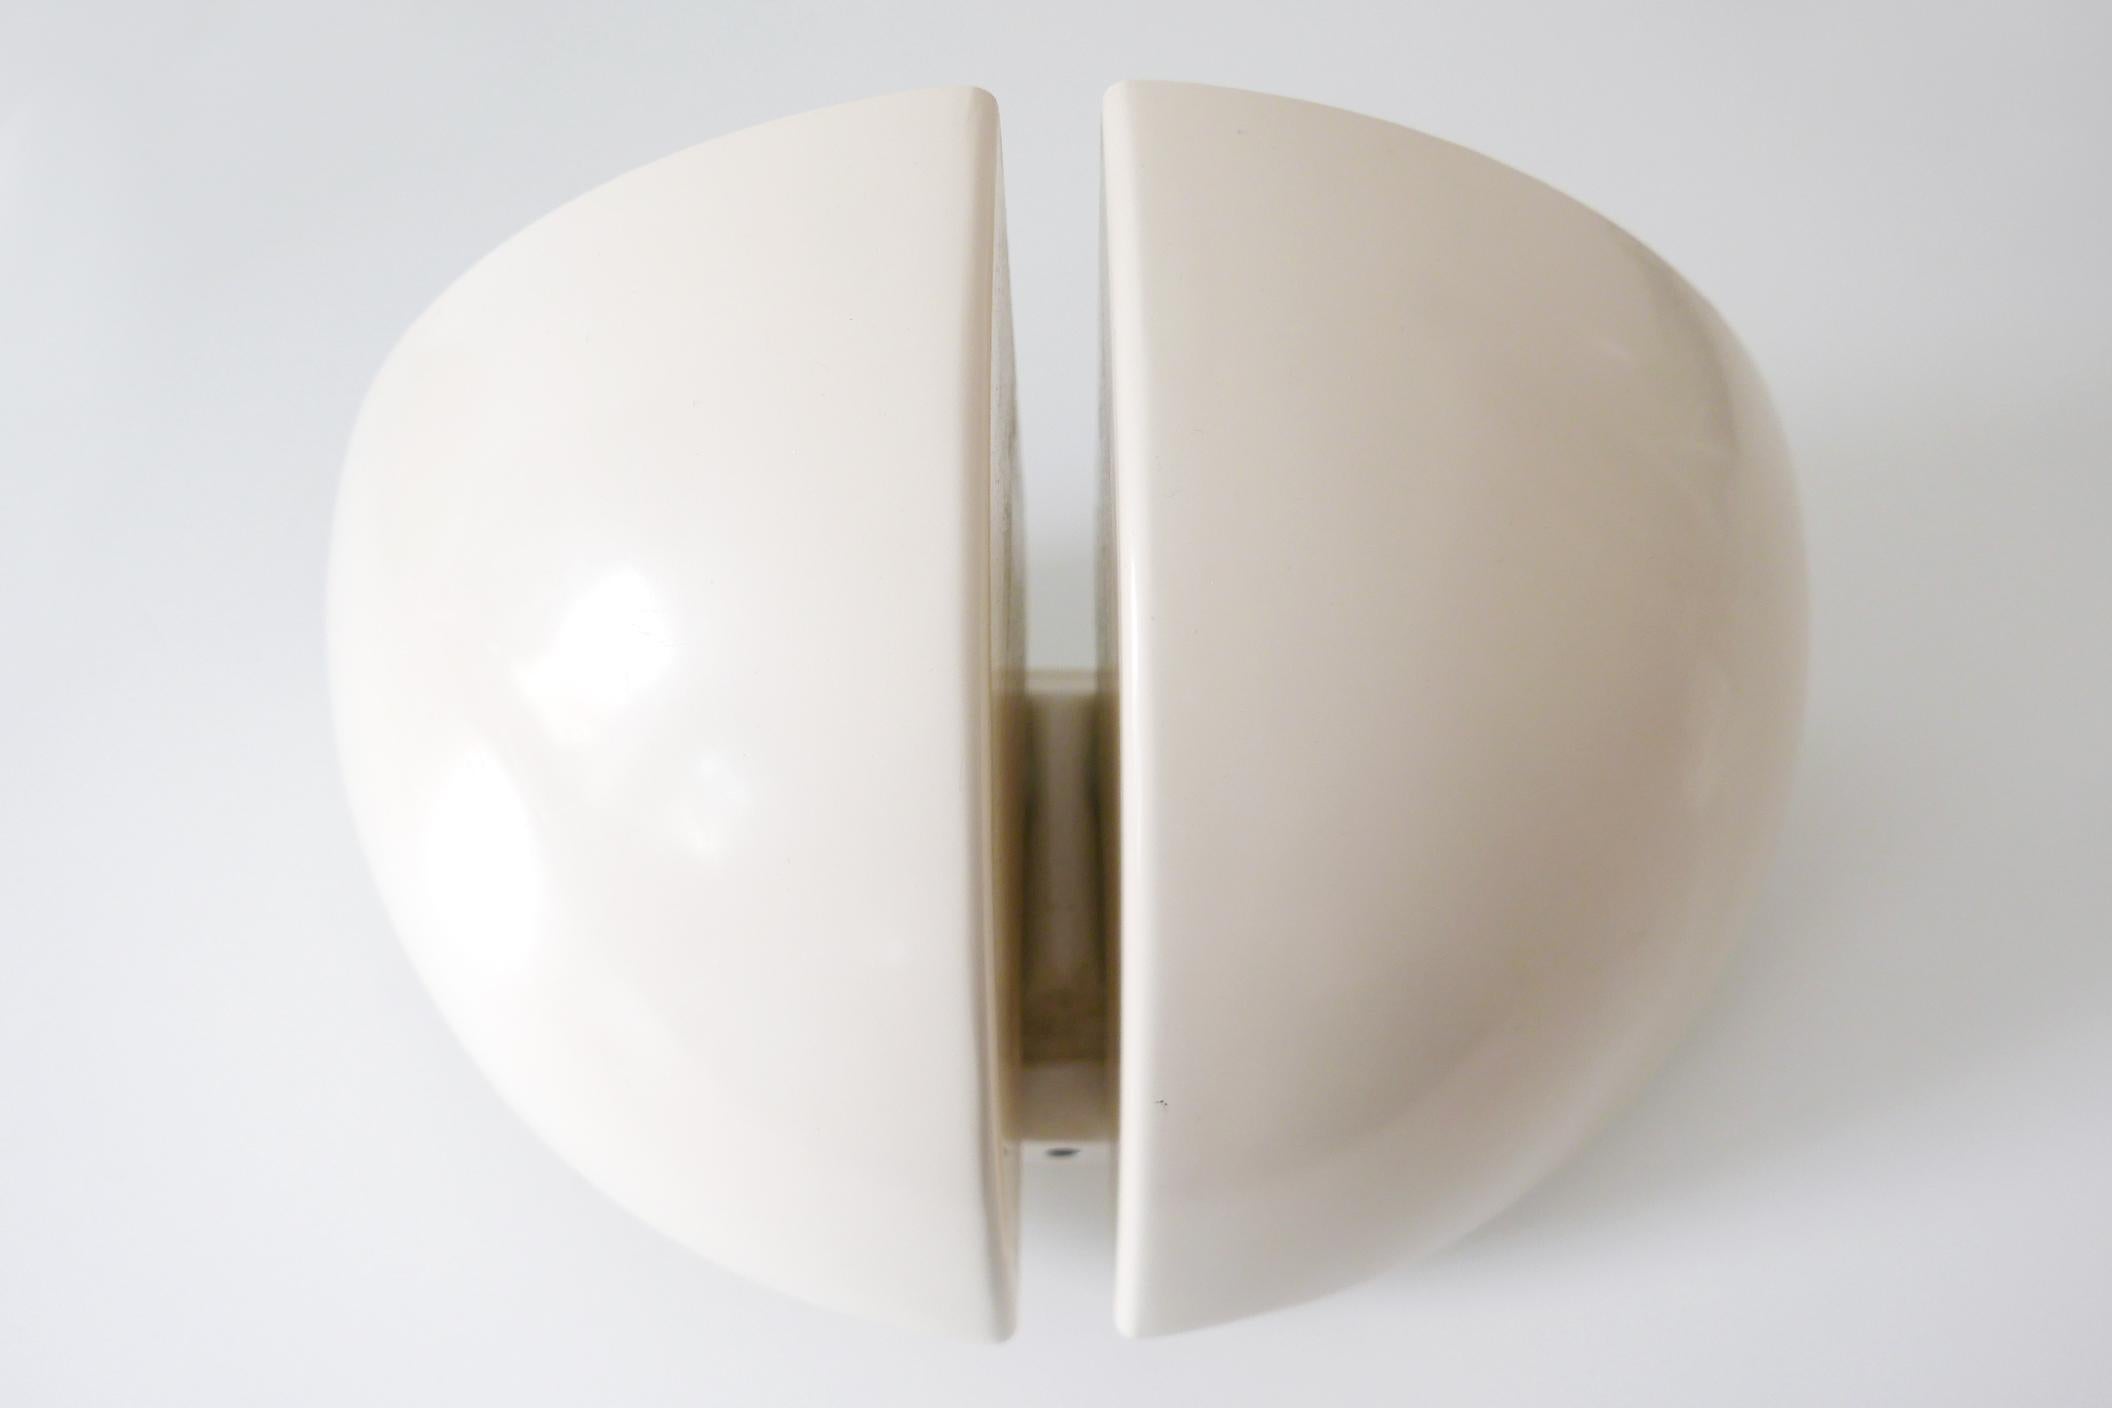 Set of Two RAAK Octavo Wall Lamps or Sconces by RAAK, Netherlands, 1970s For Sale 4